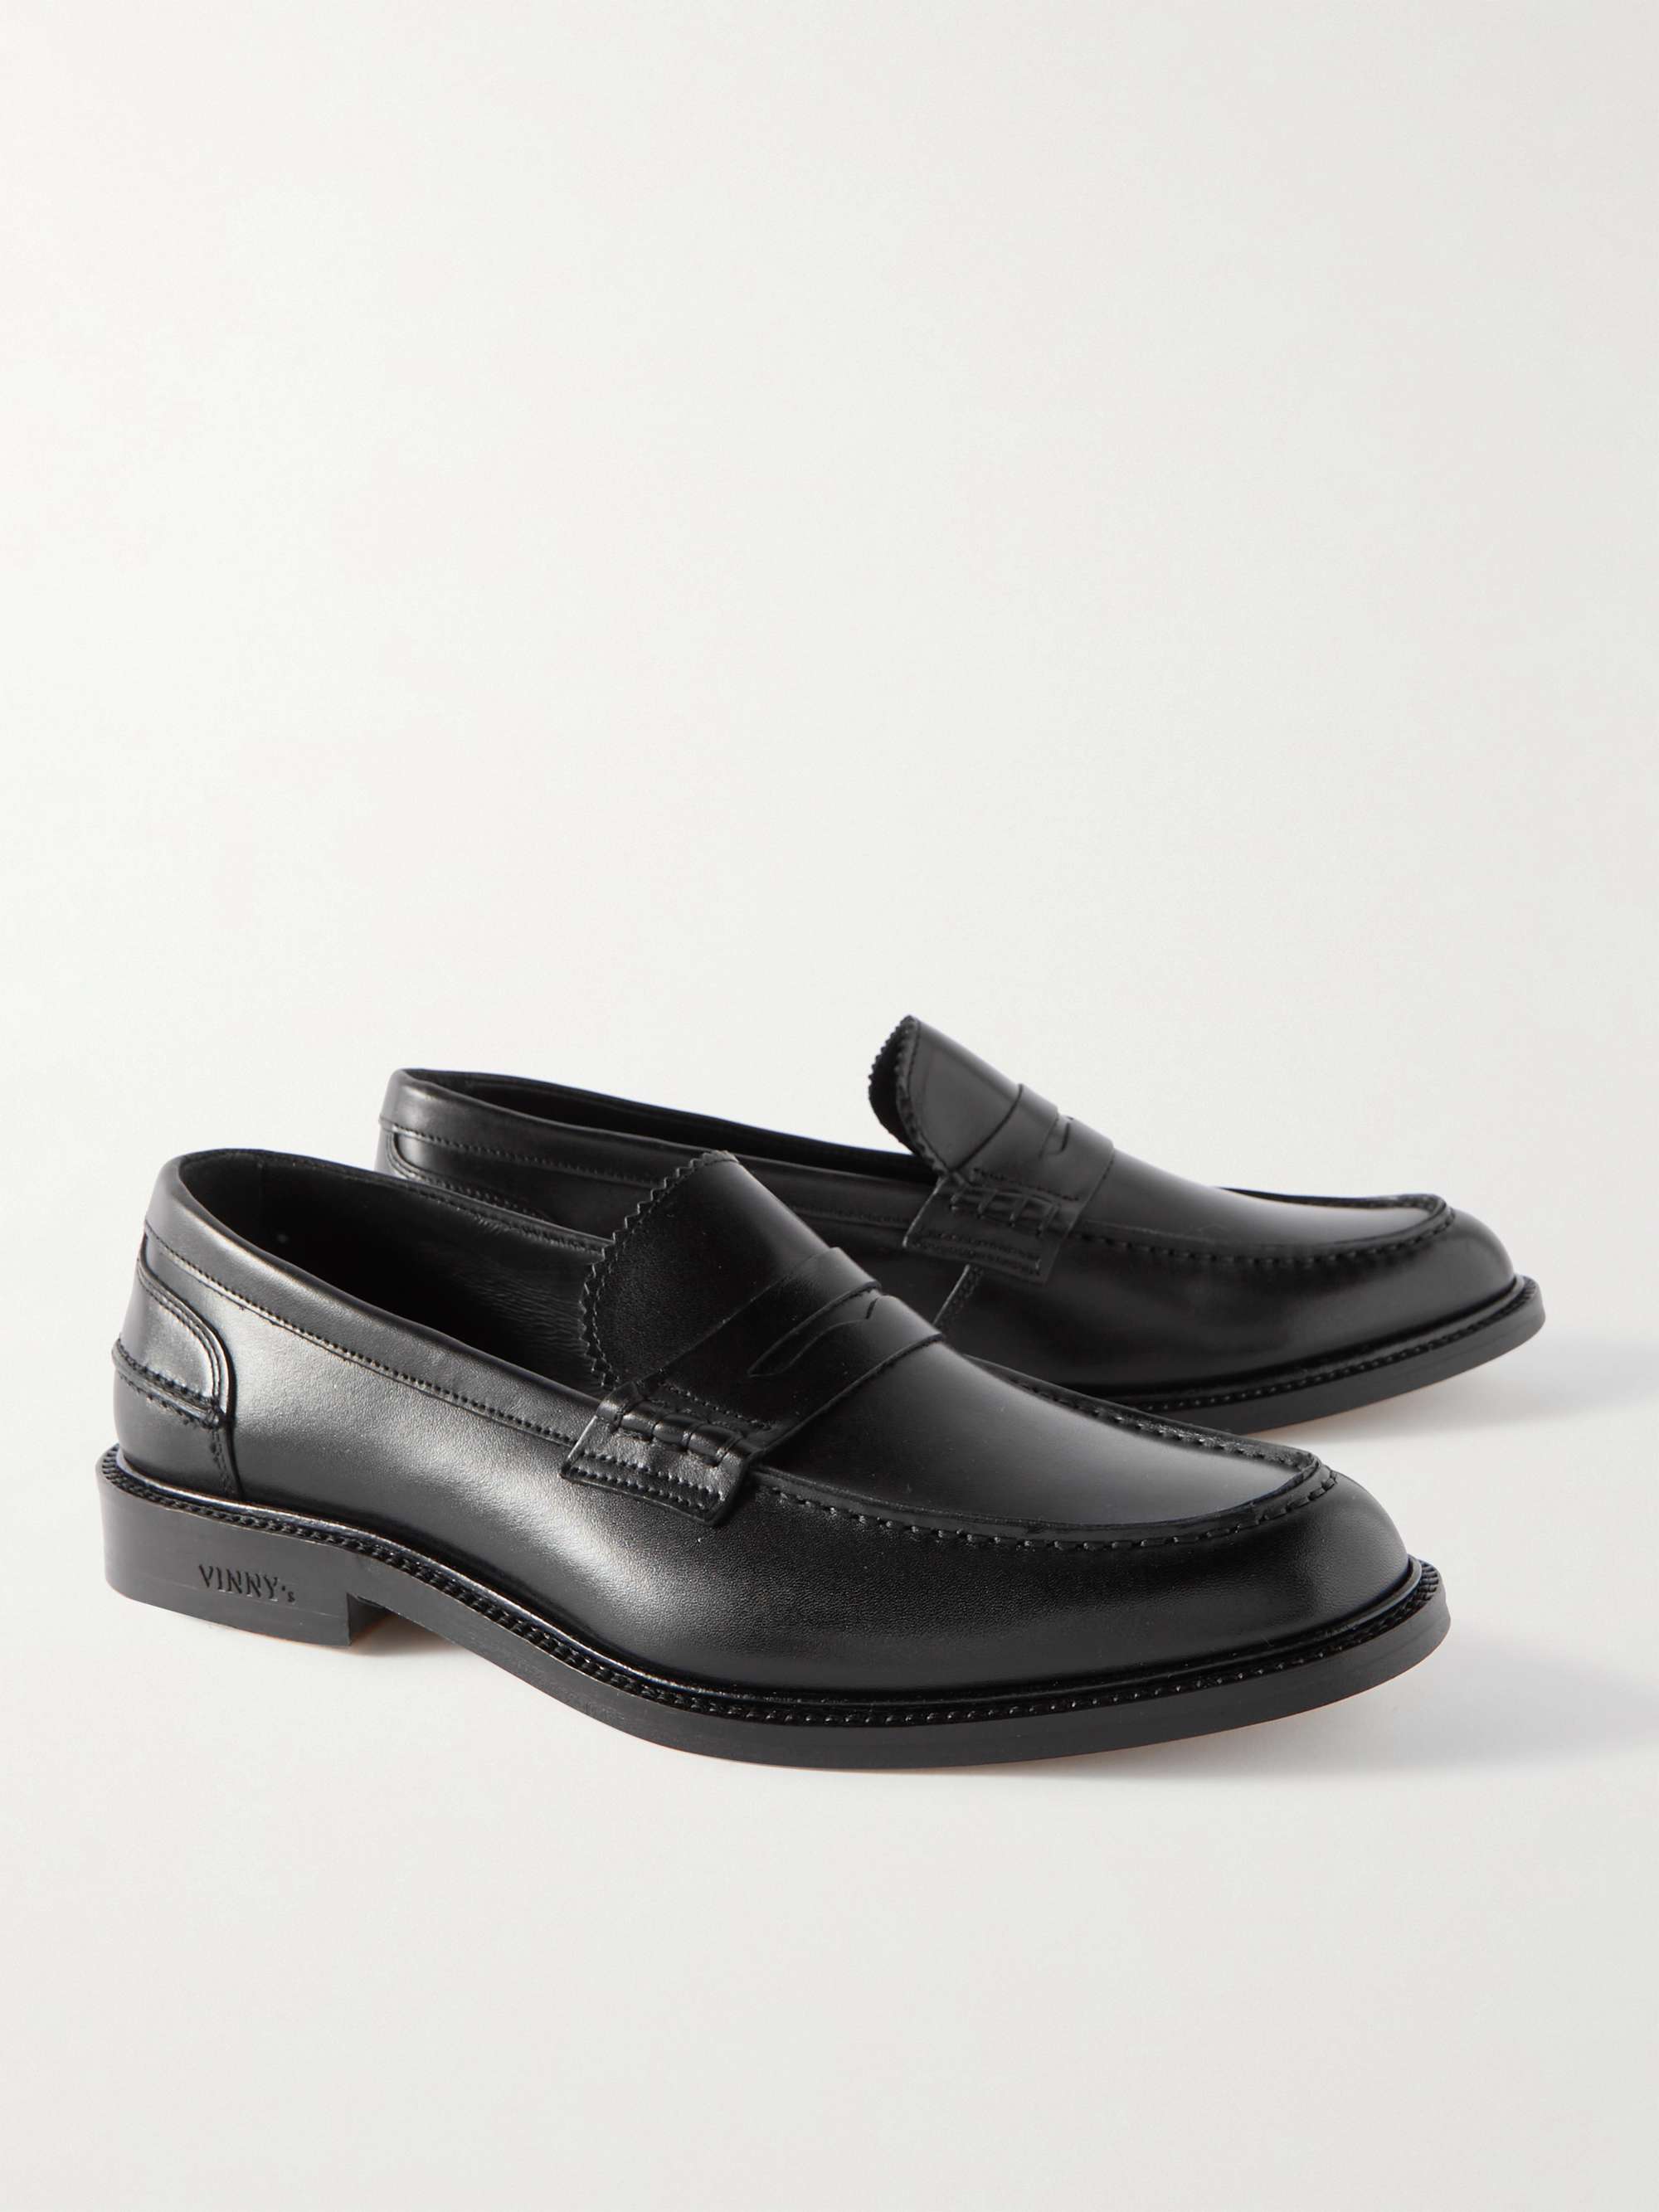 VINNY'S Townee Leather Penny Loafers